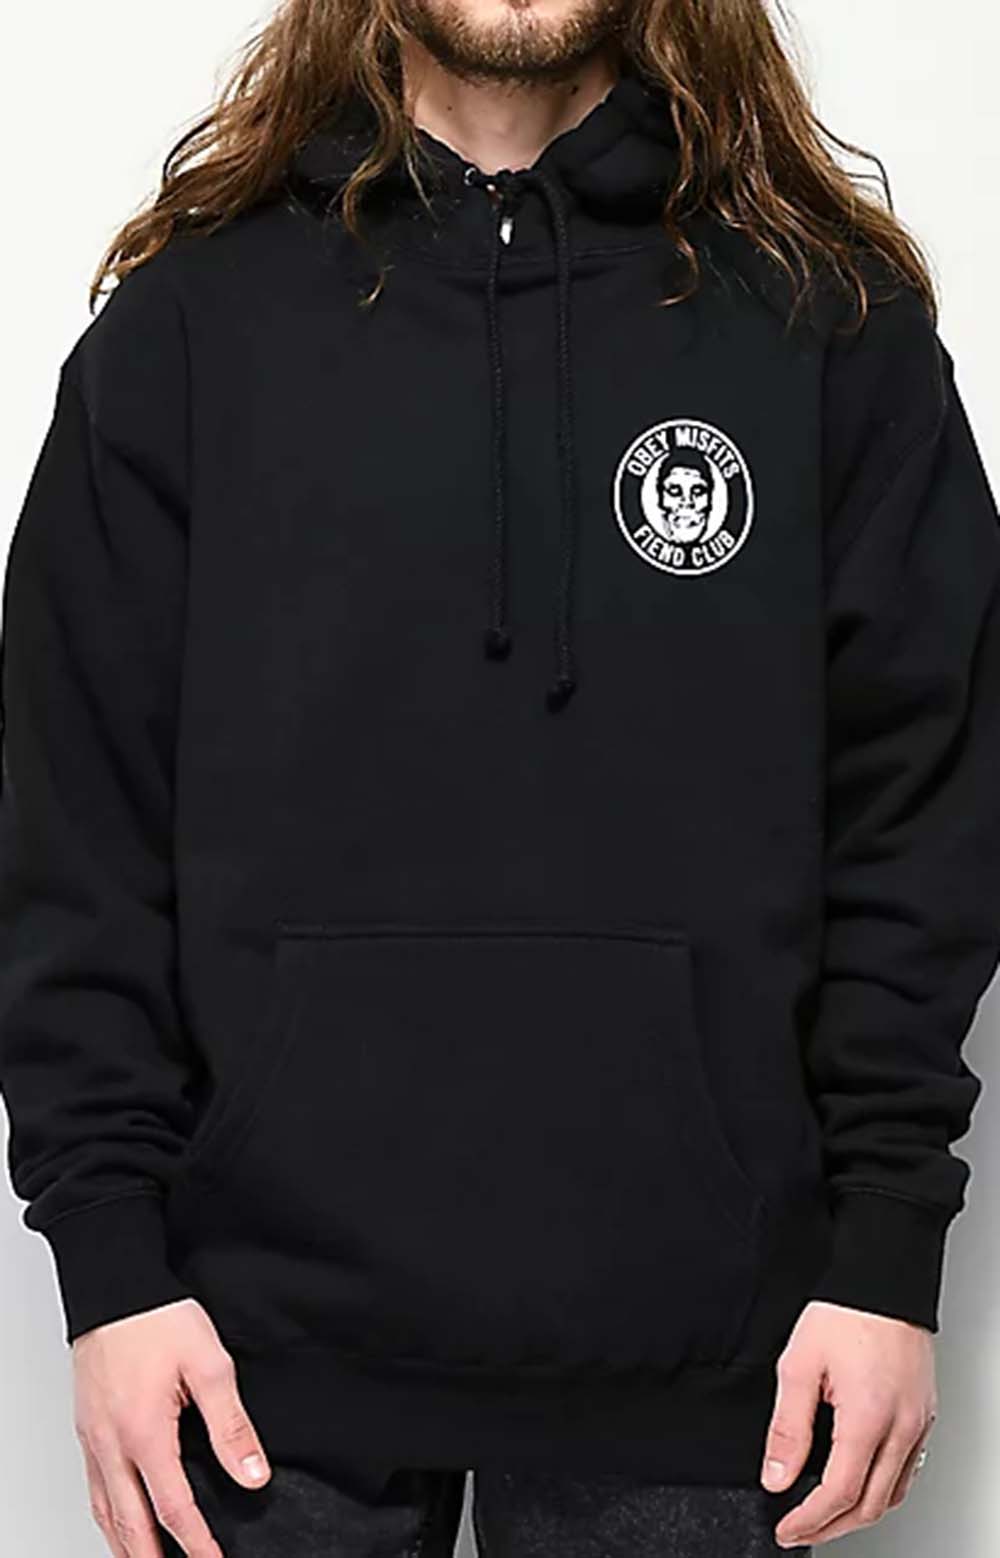 The OBEY Fiend Club Pullover Hoodie - Black